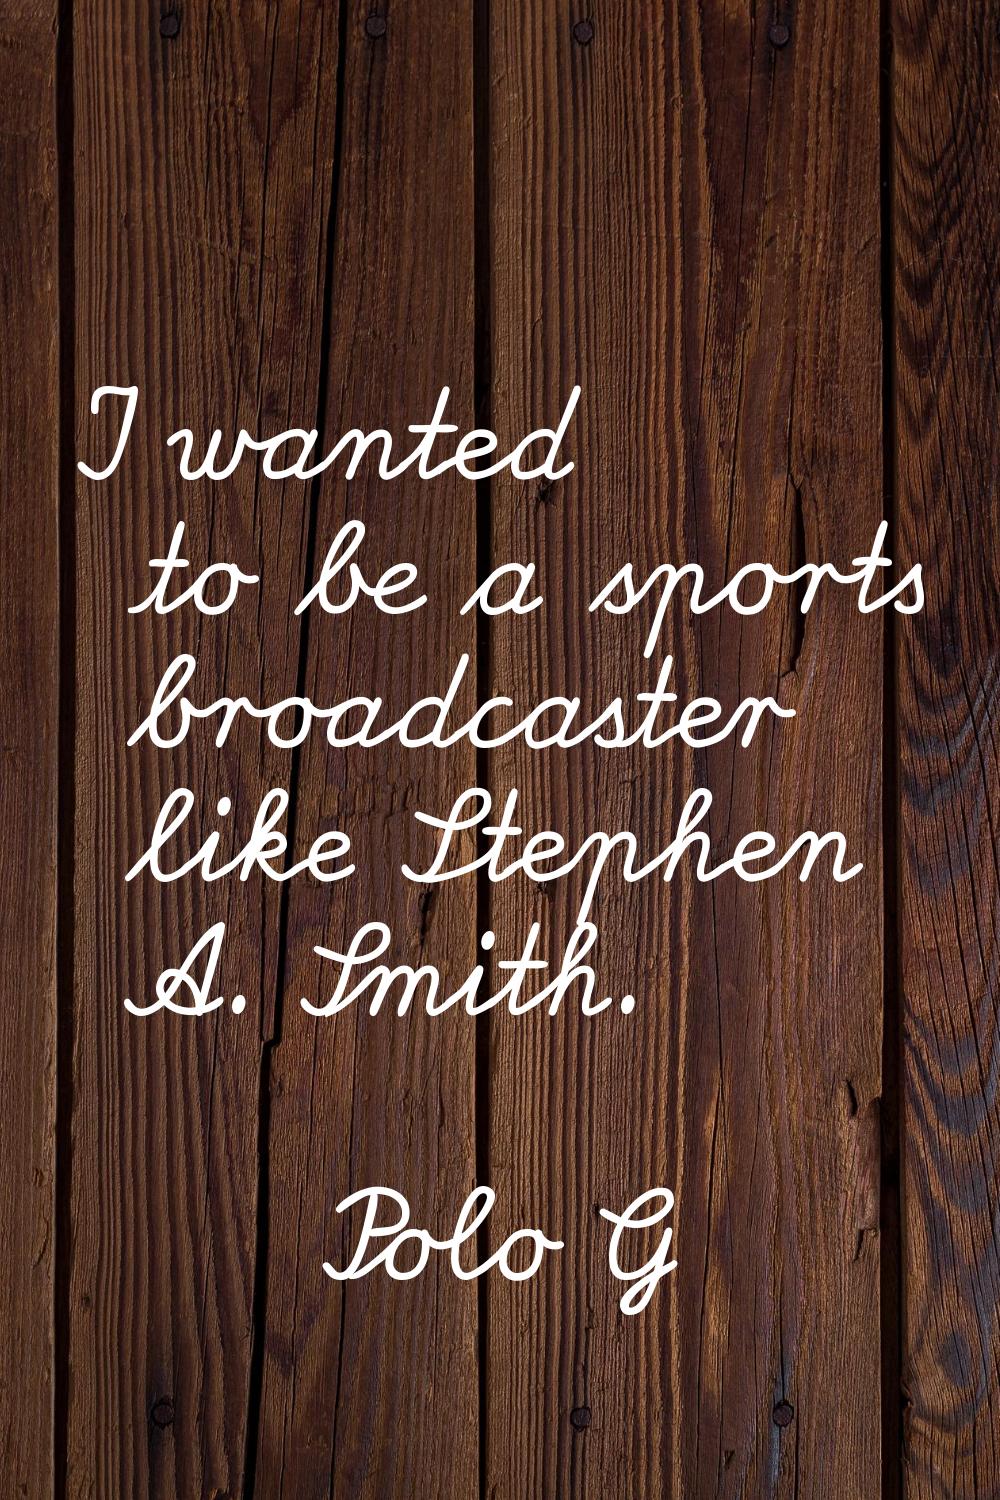 I wanted to be a sports broadcaster like Stephen A. Smith.